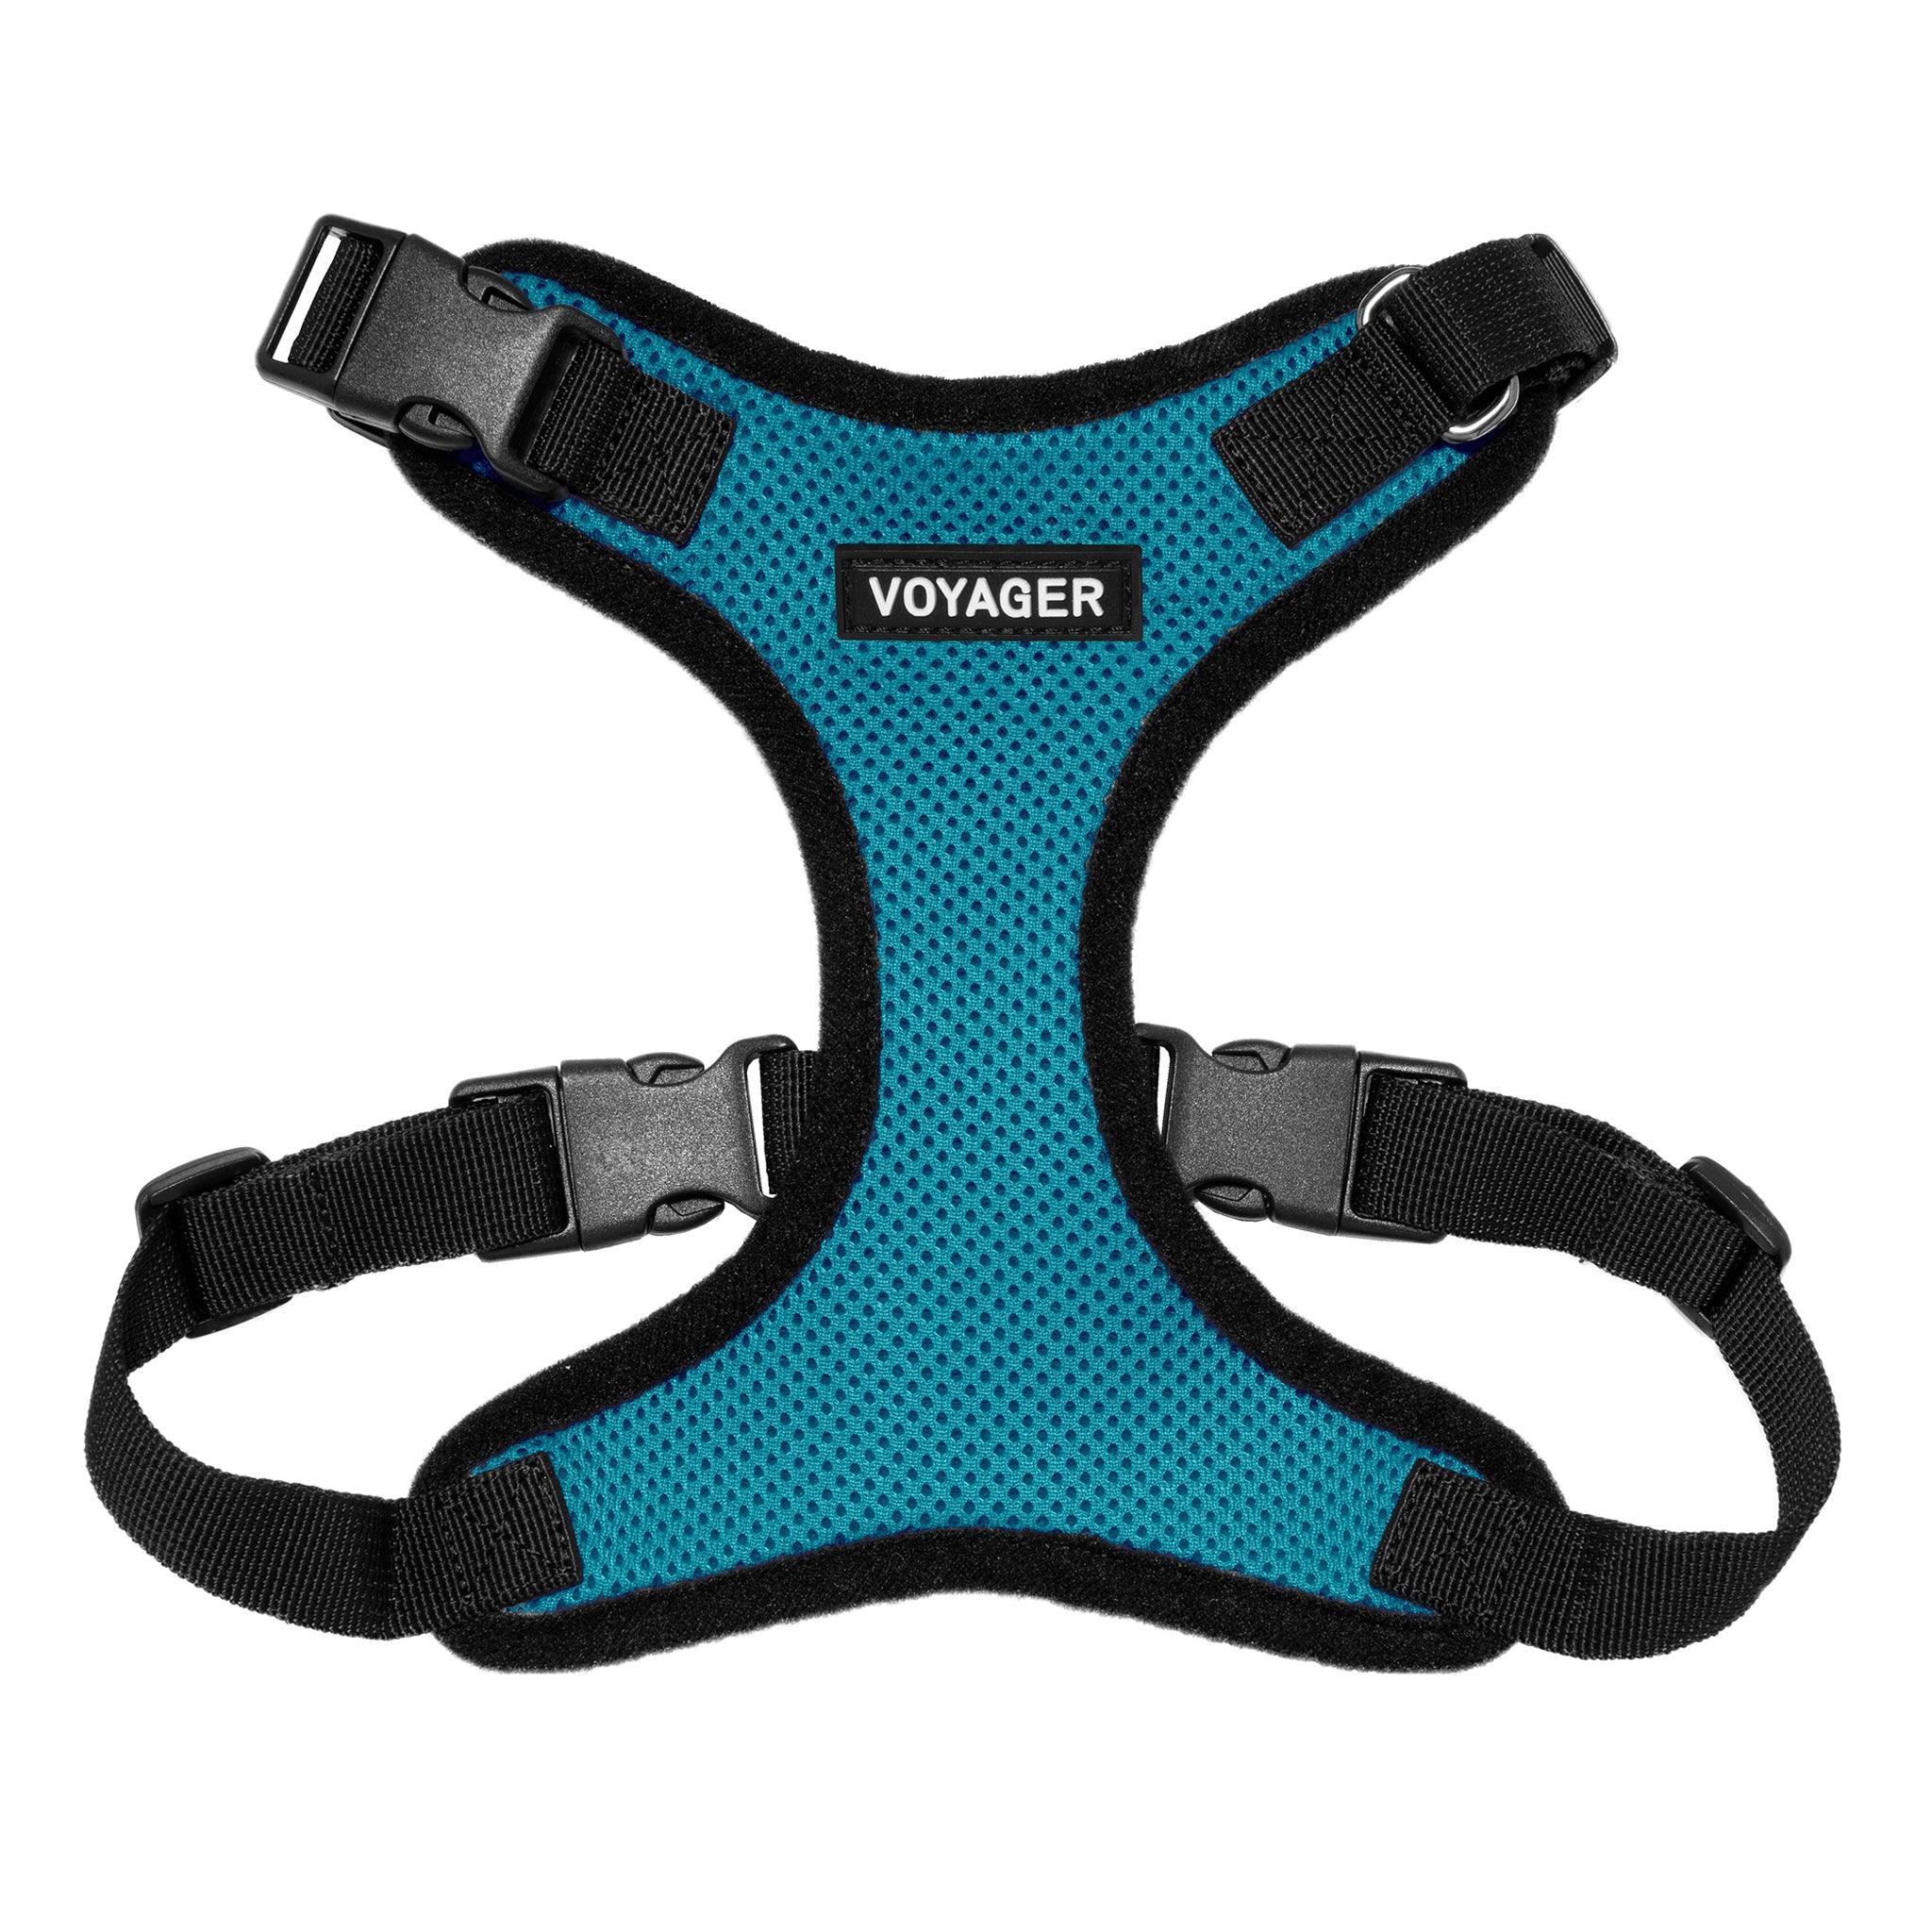 voyager dog harness near me